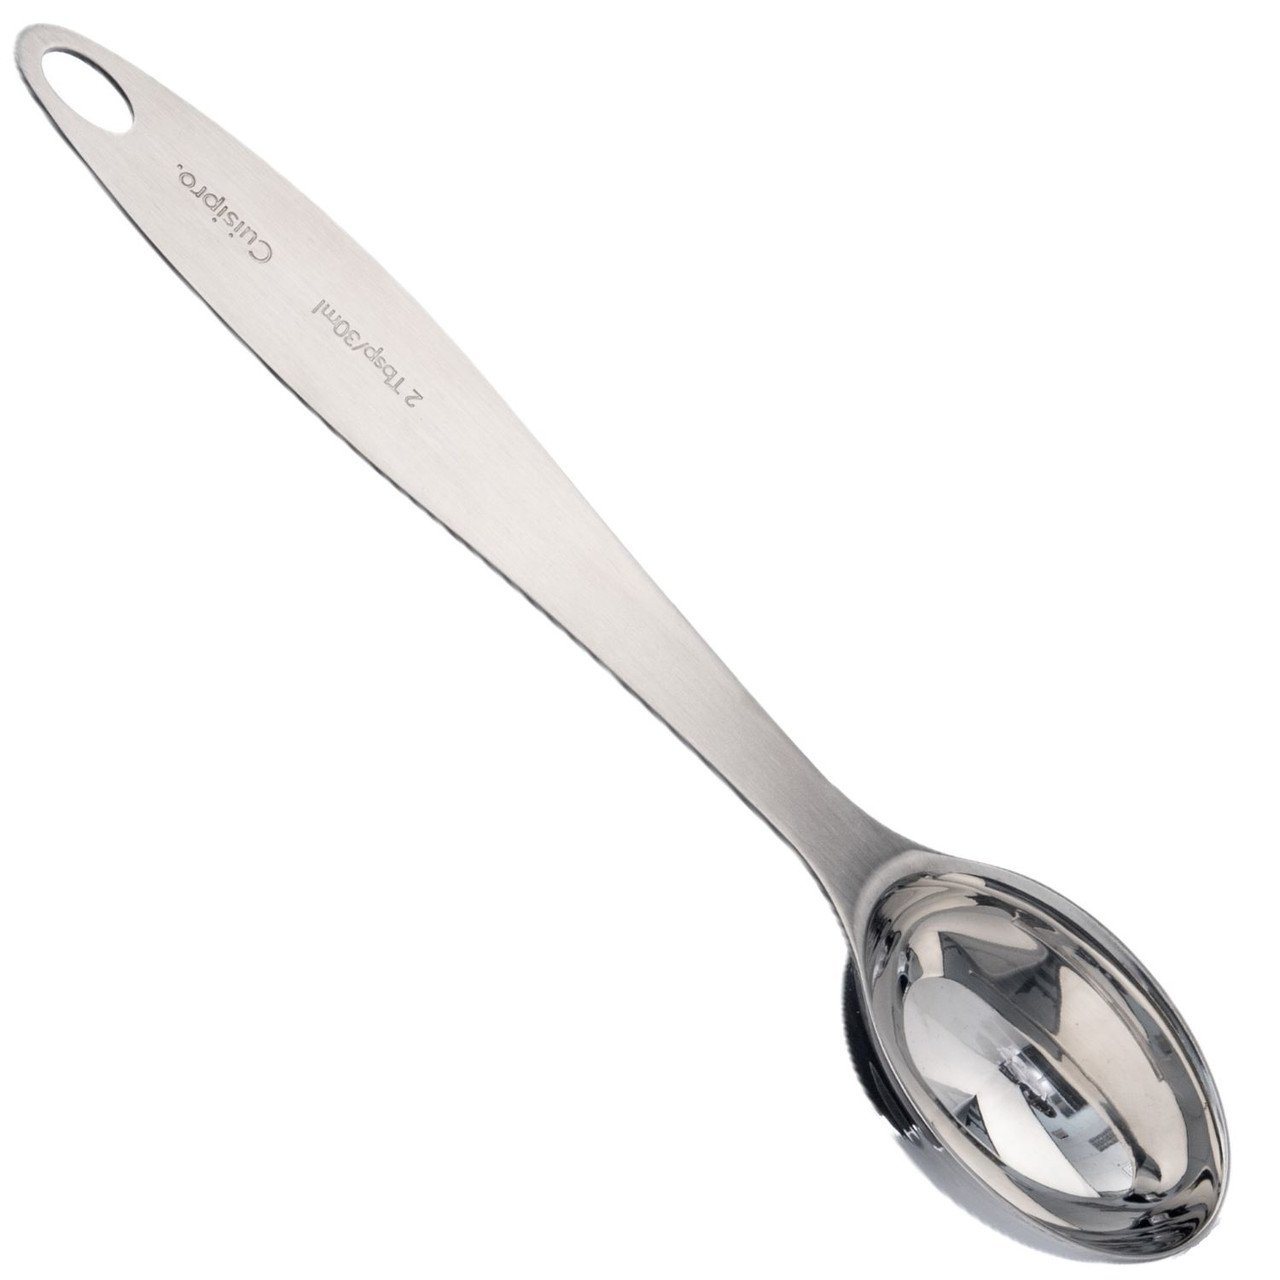 Cuisipro Cafe Collection - Stainless Steel Long Handle Coffee Scoop (BC 747041)